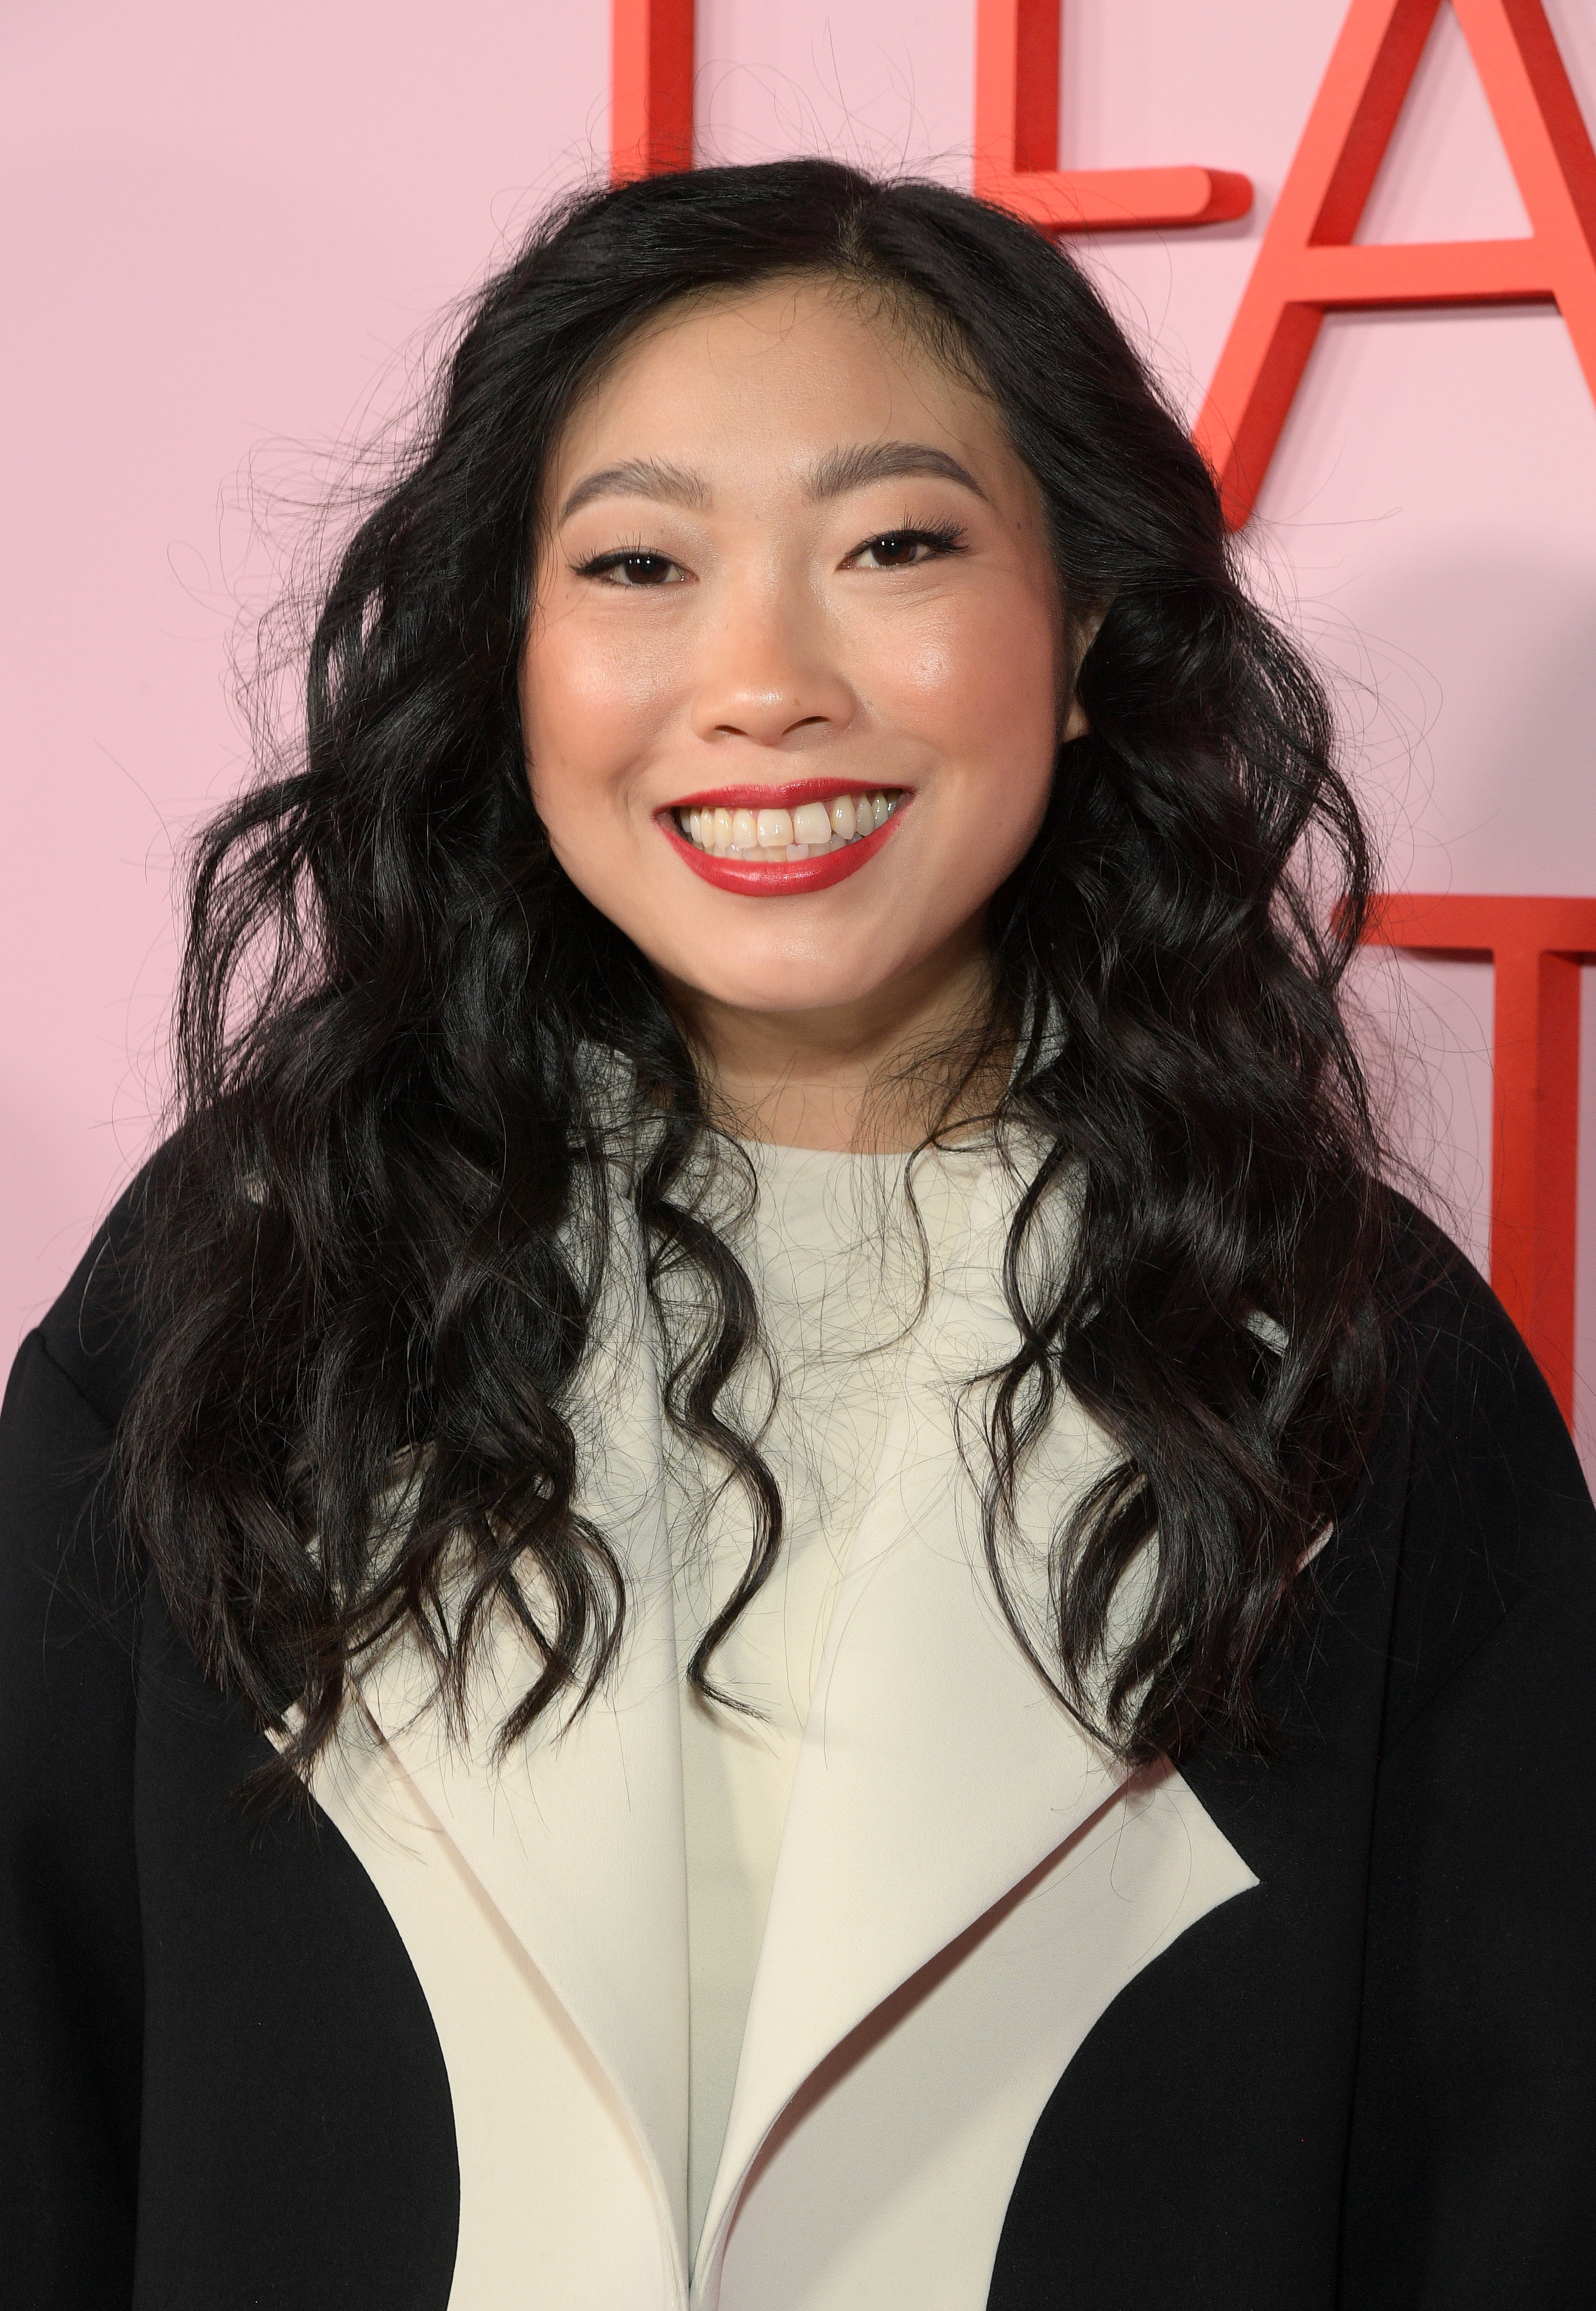 Awkwafina smiling at event, wearing a white top with black jacket, subtle makeup and wavy hair